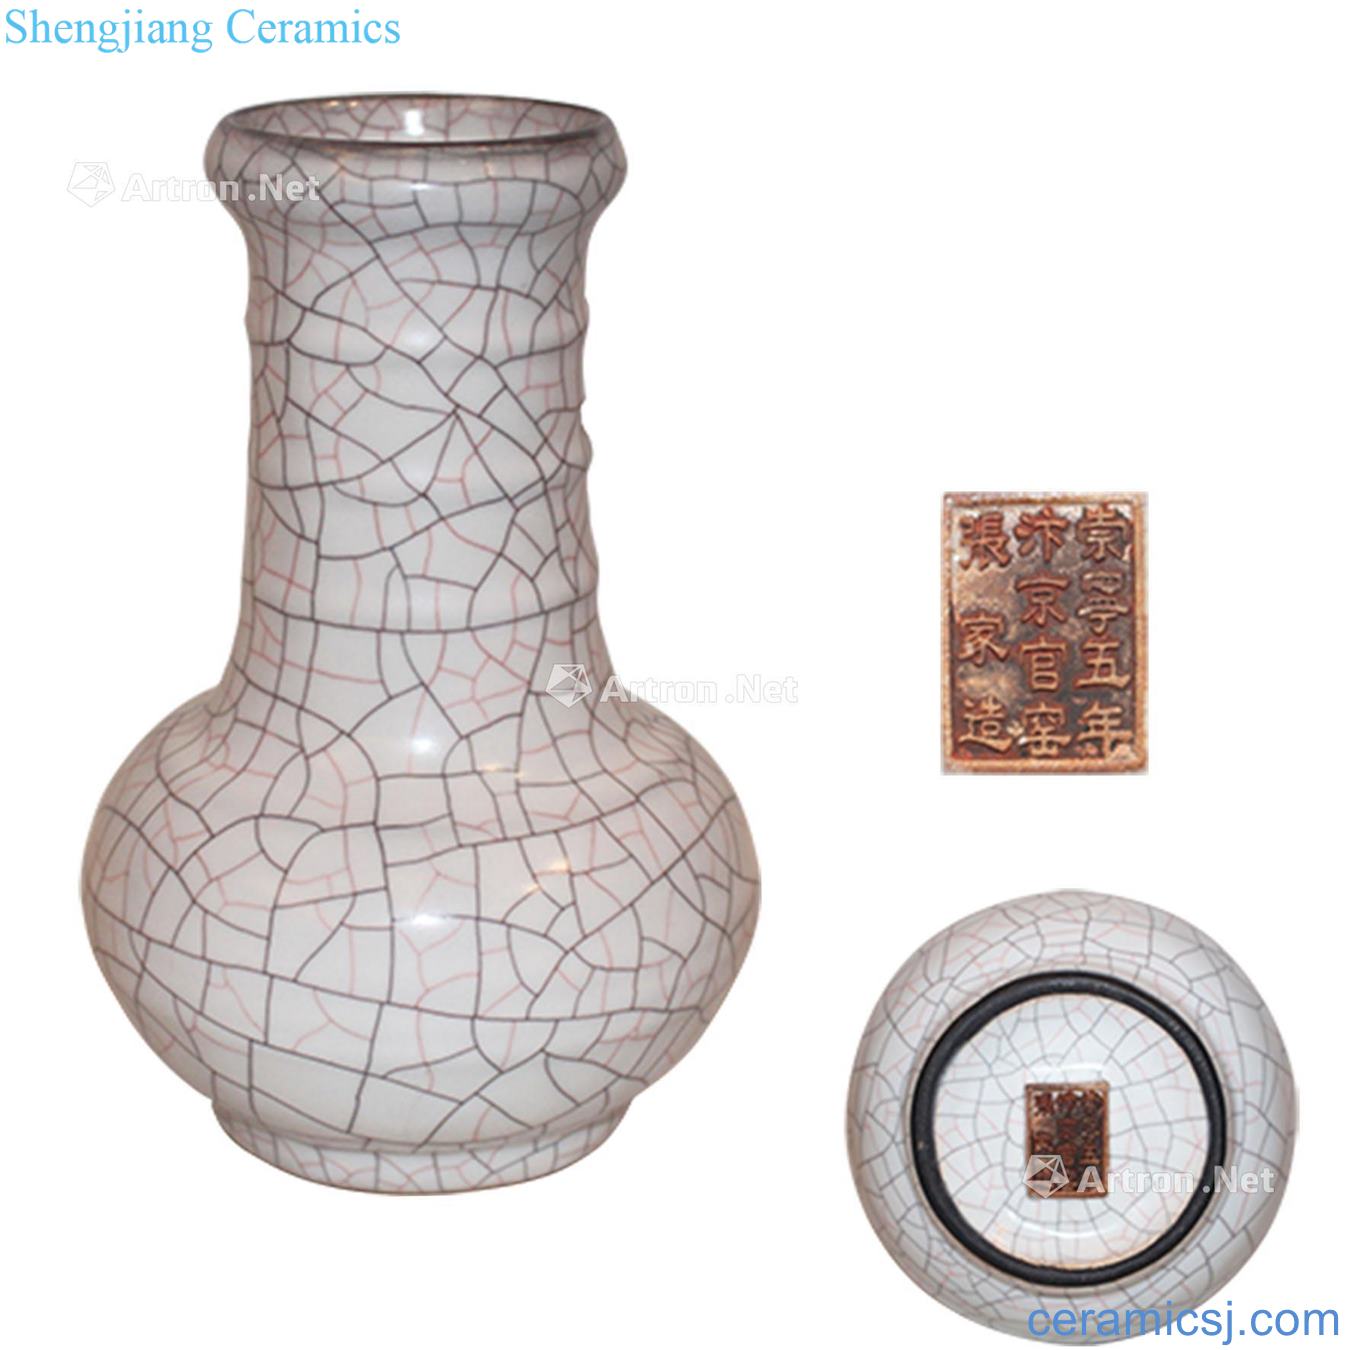 The song dynasty Kiln month string lines craft bottles